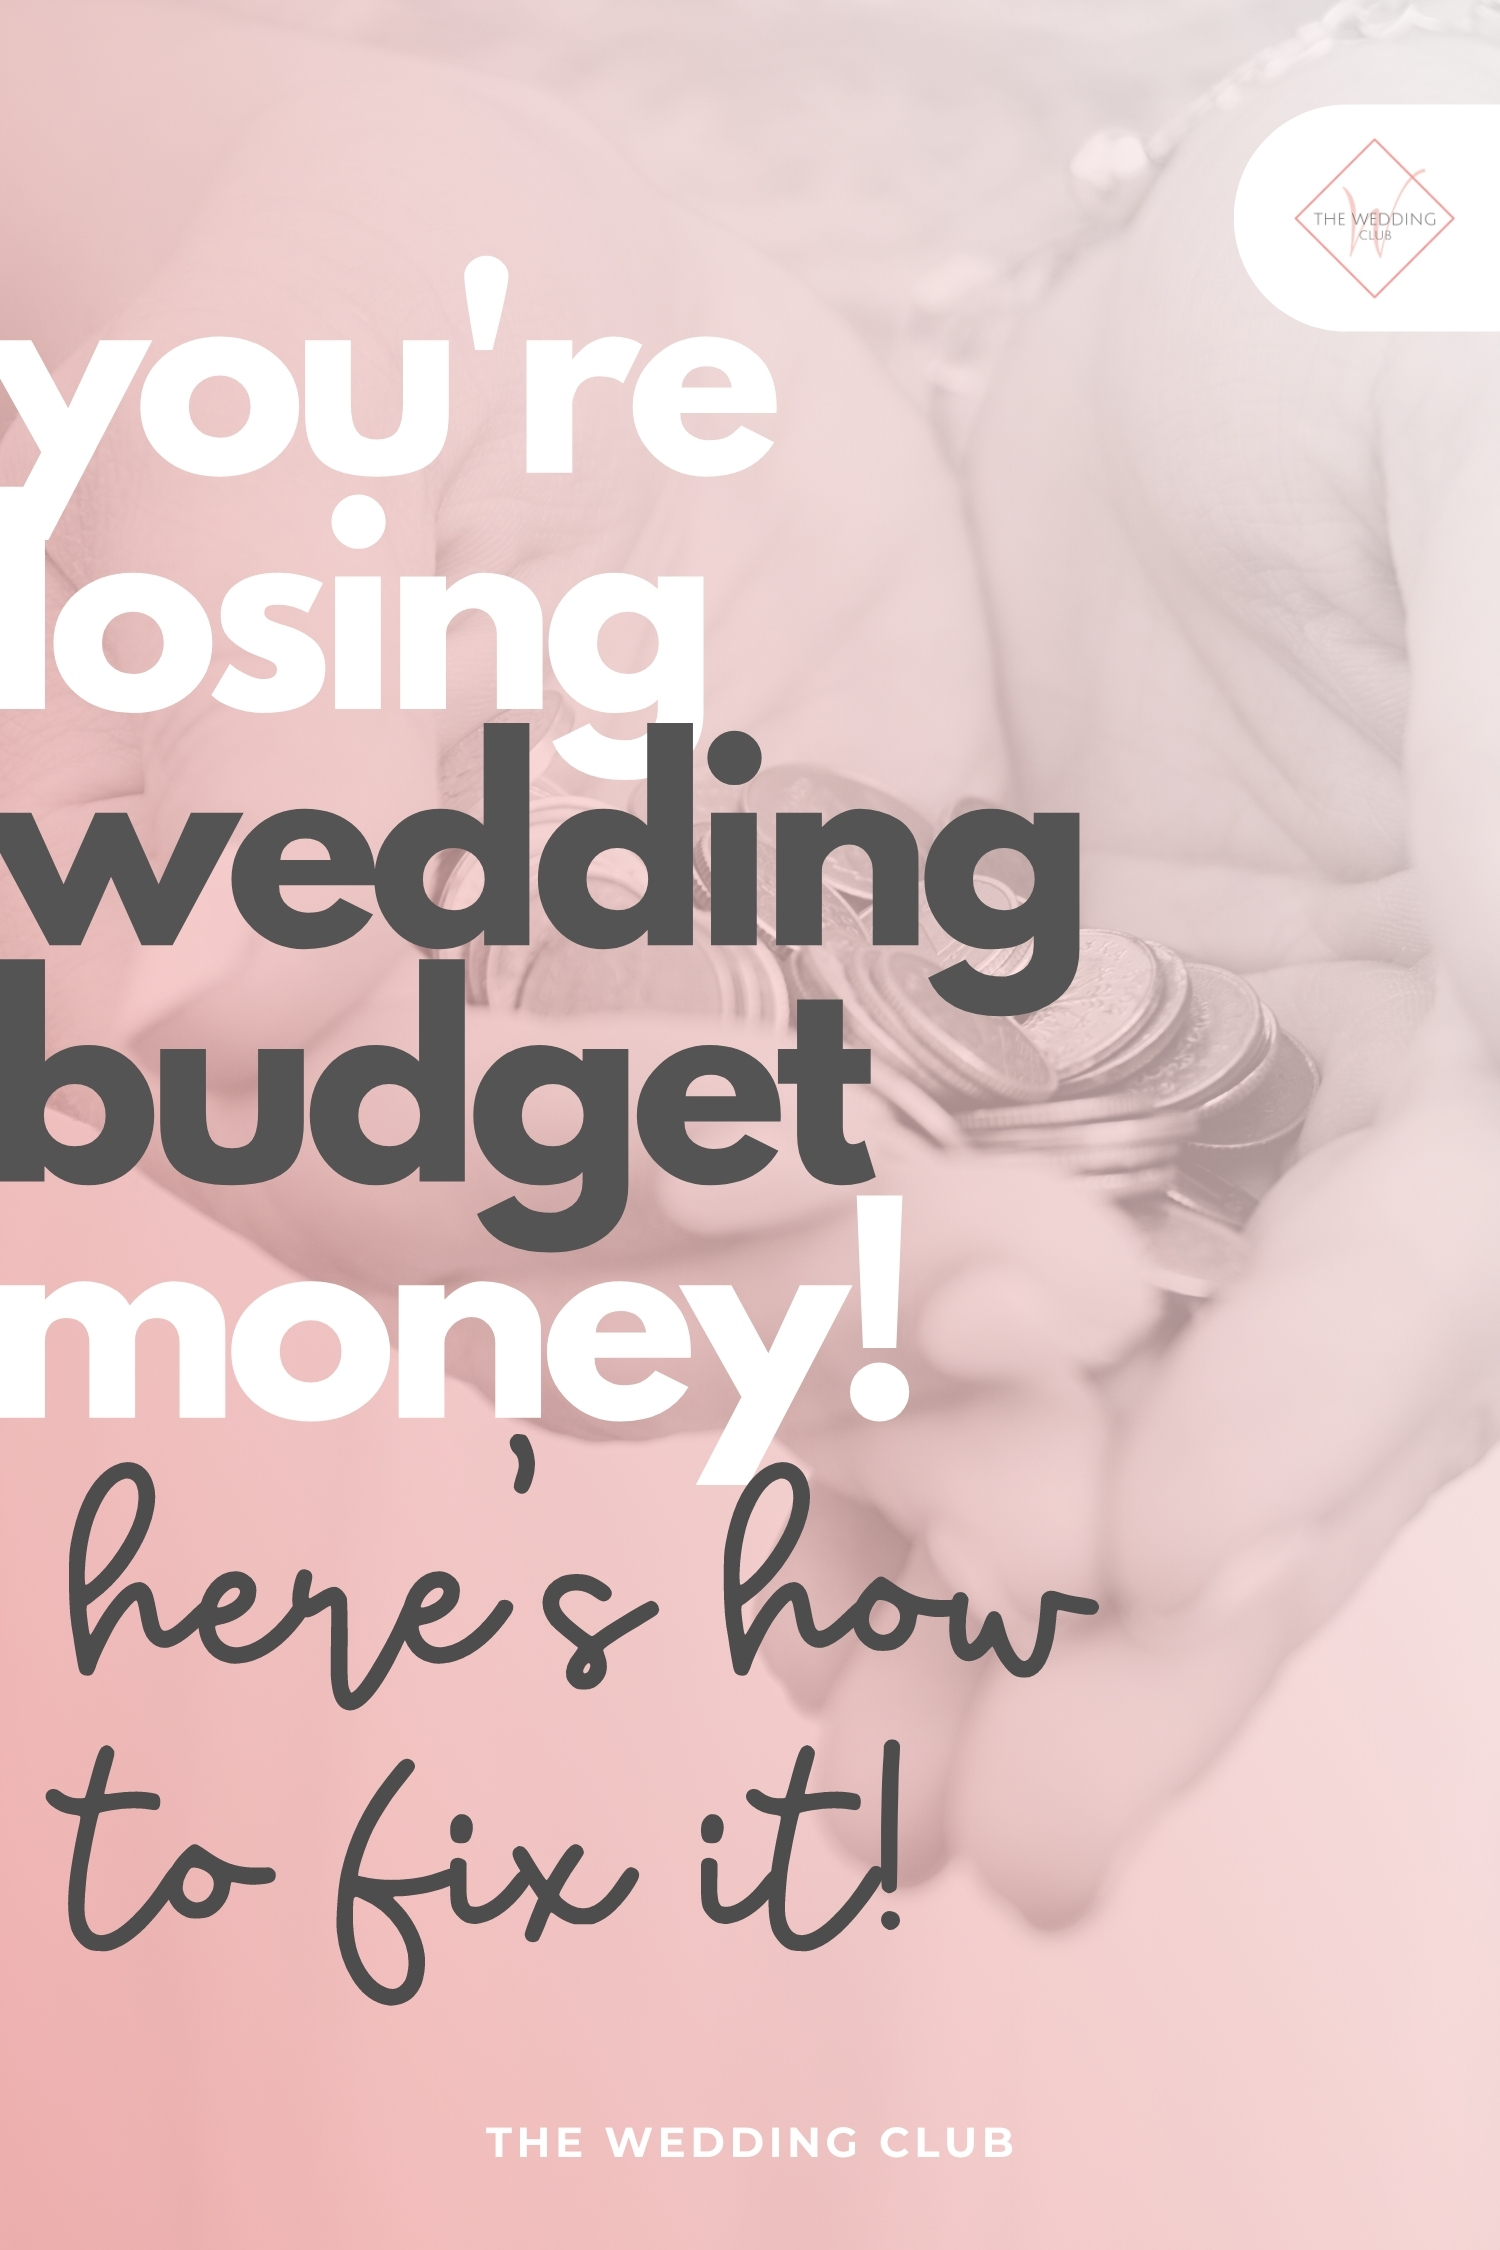 Are you losing precious wedding money due to not budgeting Read this!